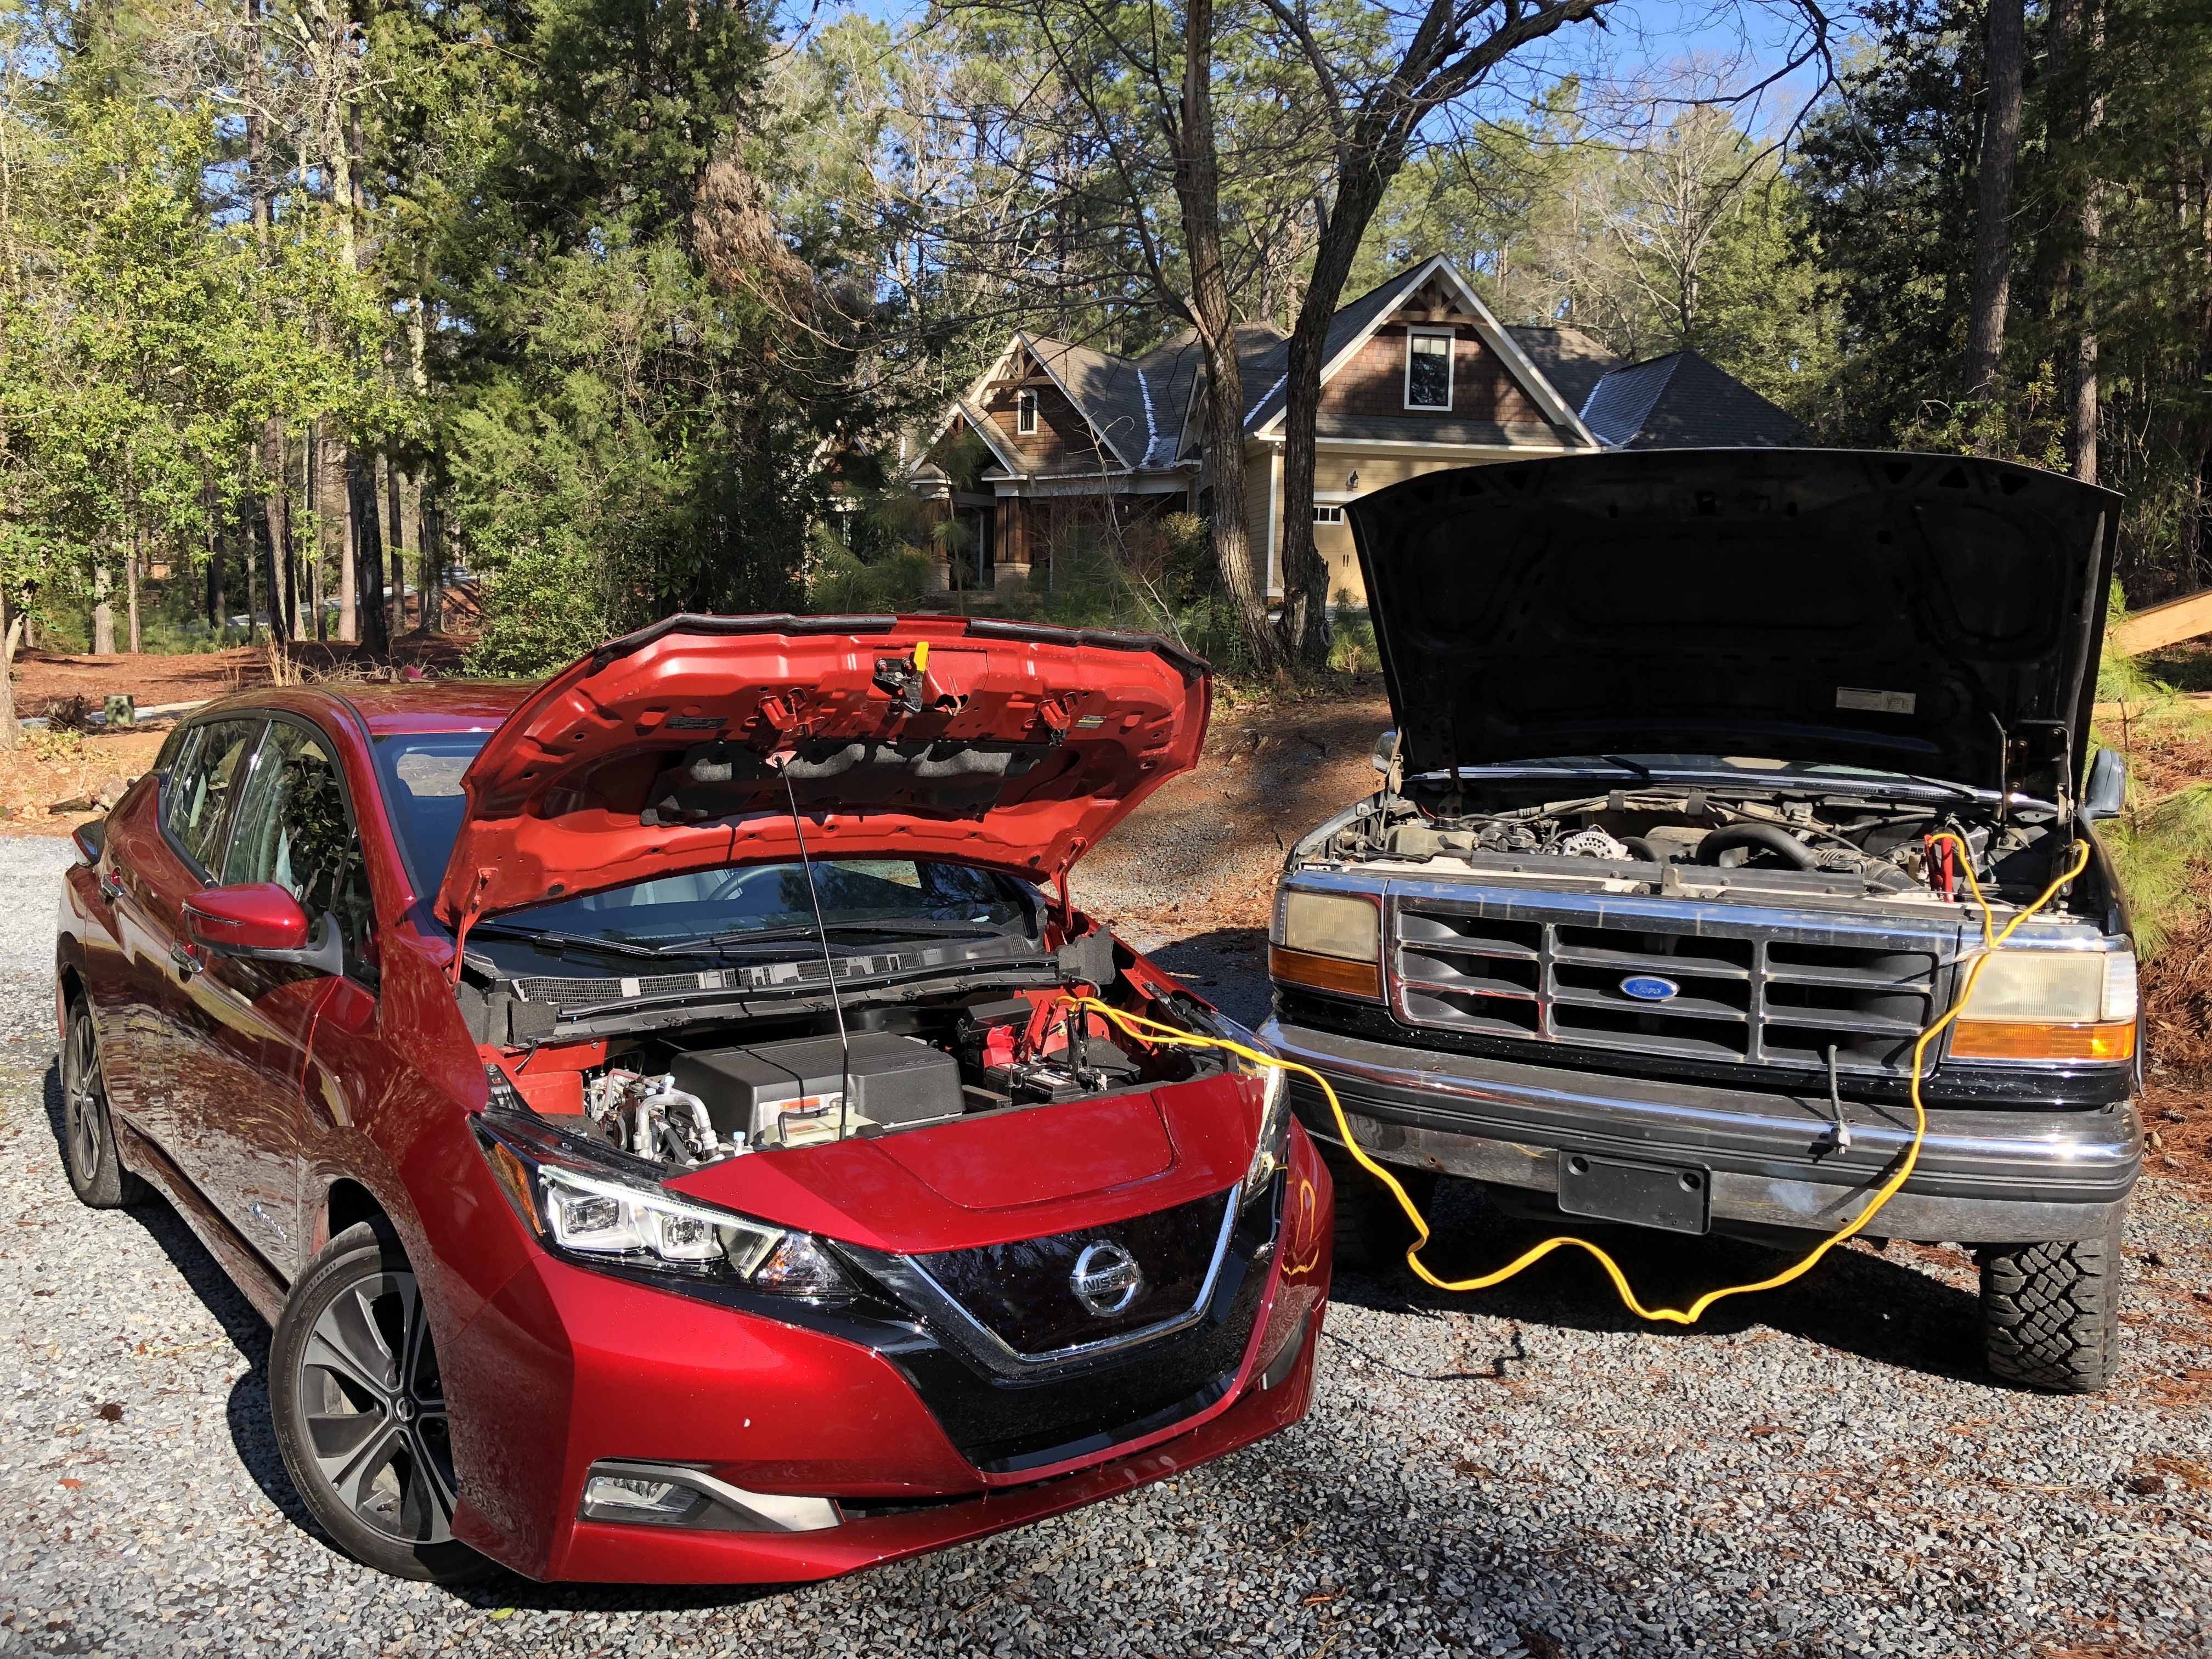 Why Do Electric Cars Still Use 12-Volt Batteries?